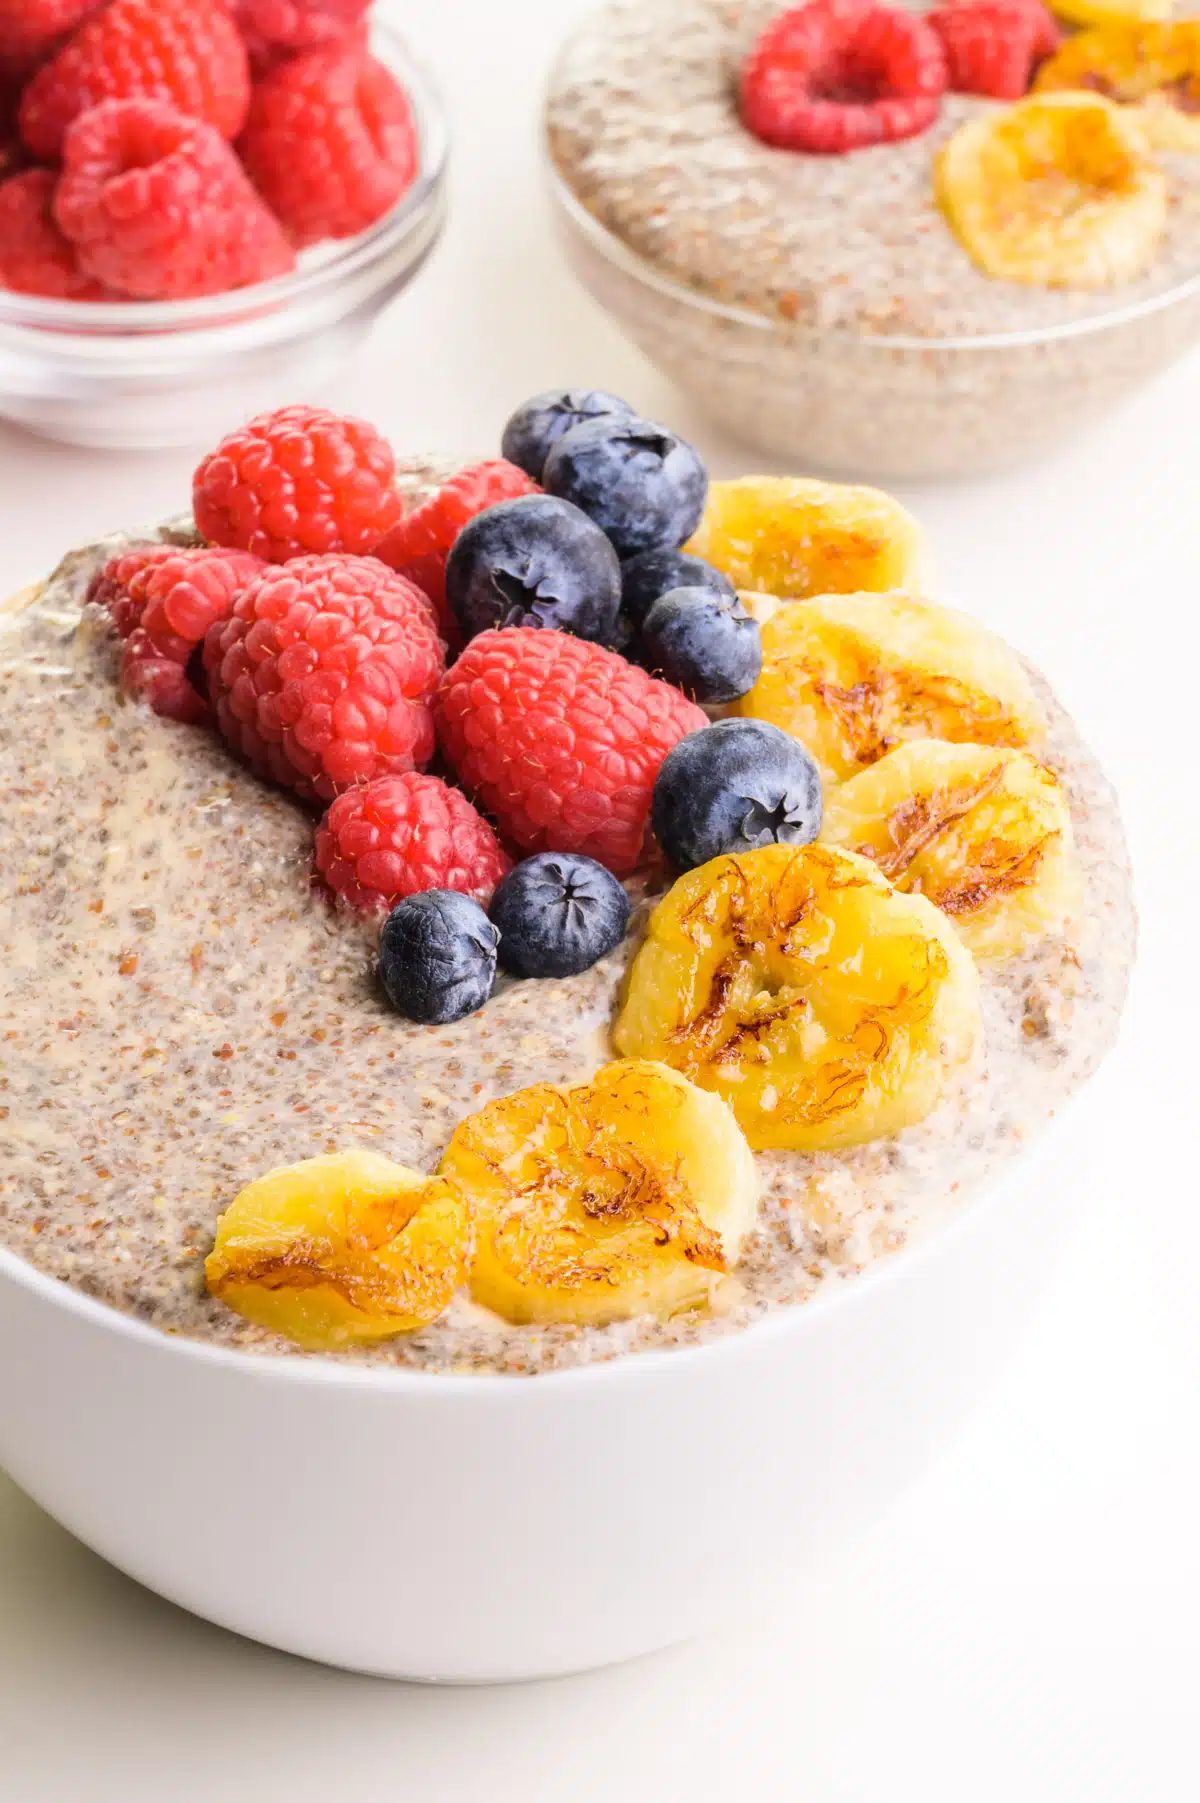 A bowl of warm chia pudding has seared bananas and fresh berries on top. There is another bowl of the pudding and a bowl of fresh raspberries in the background.